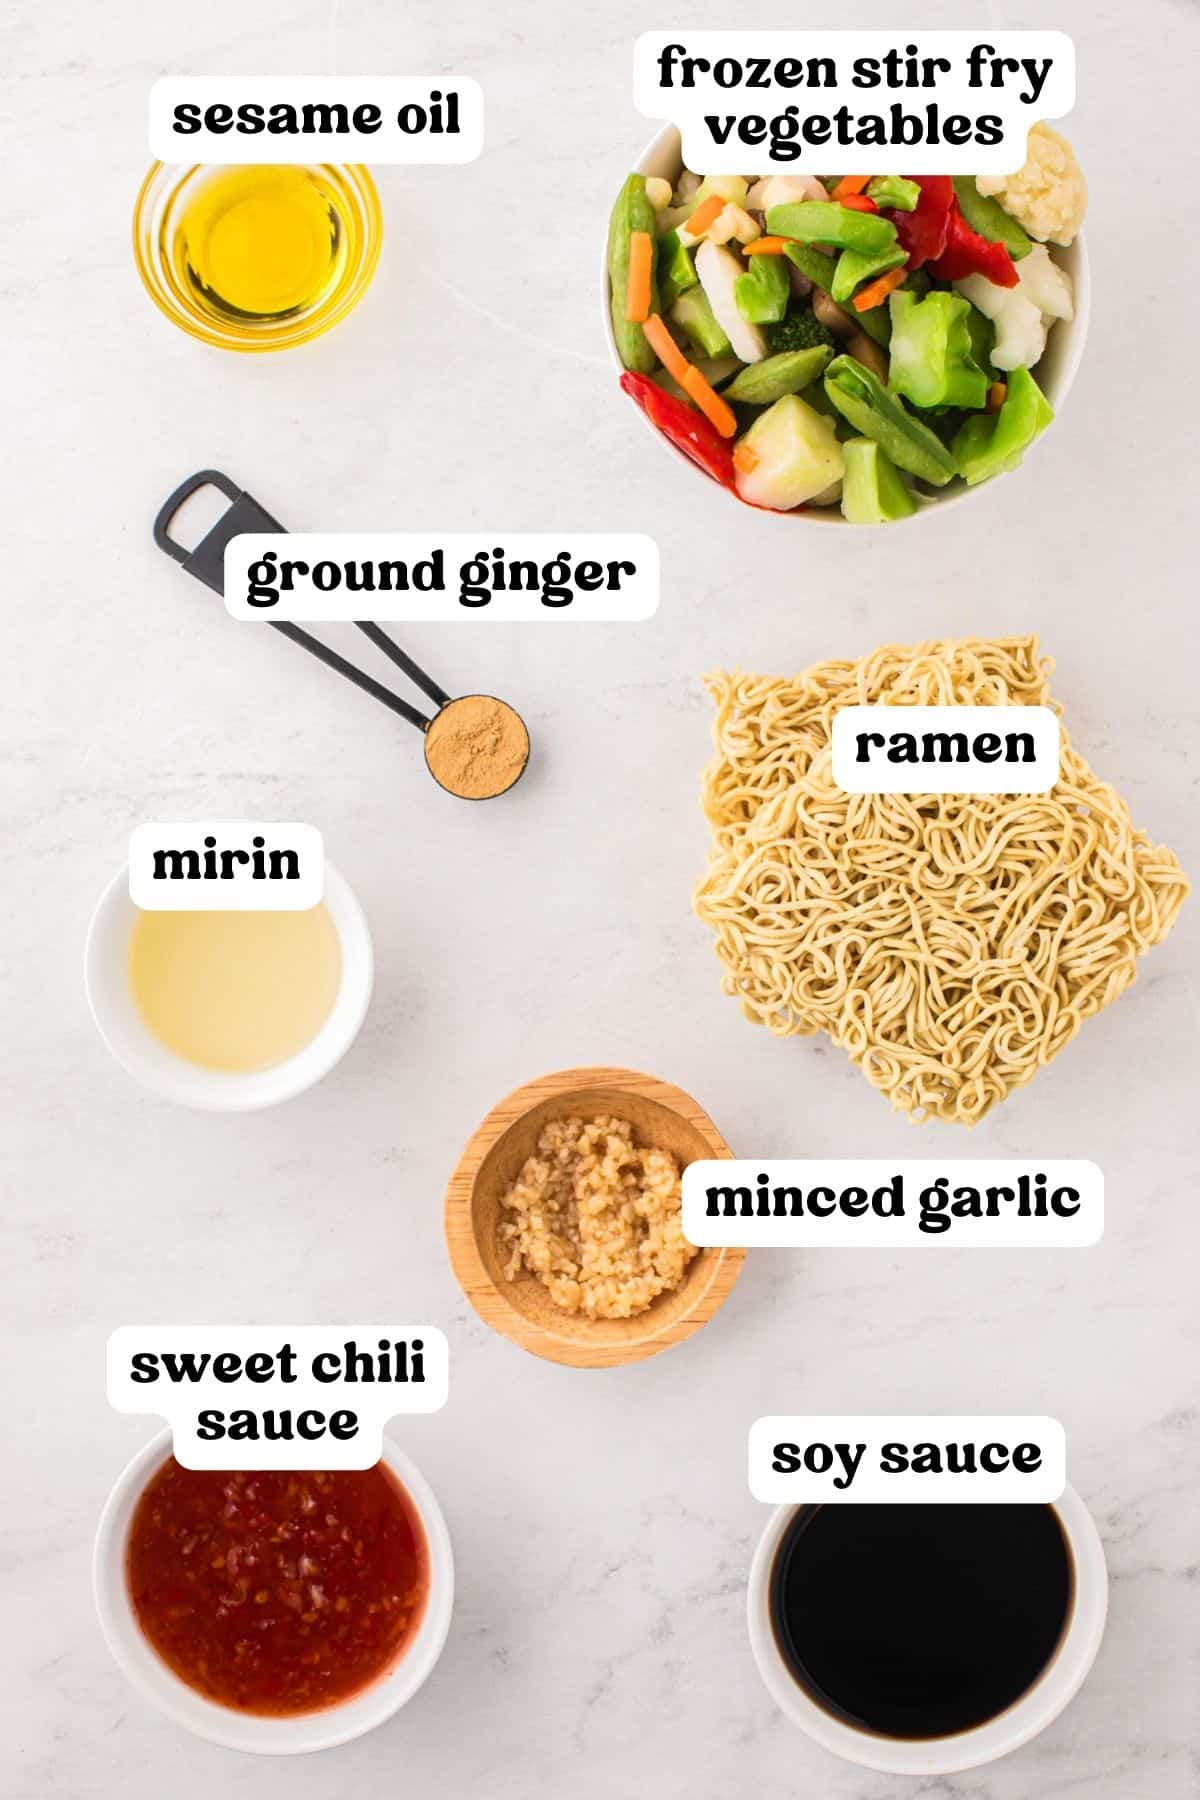 Ingredients on countertop: frozen stir-fry vegetables, ramen noodles, minced garlic, mirin, sesame oil, ginger powder, soy sauce, and sweet chili sauce.